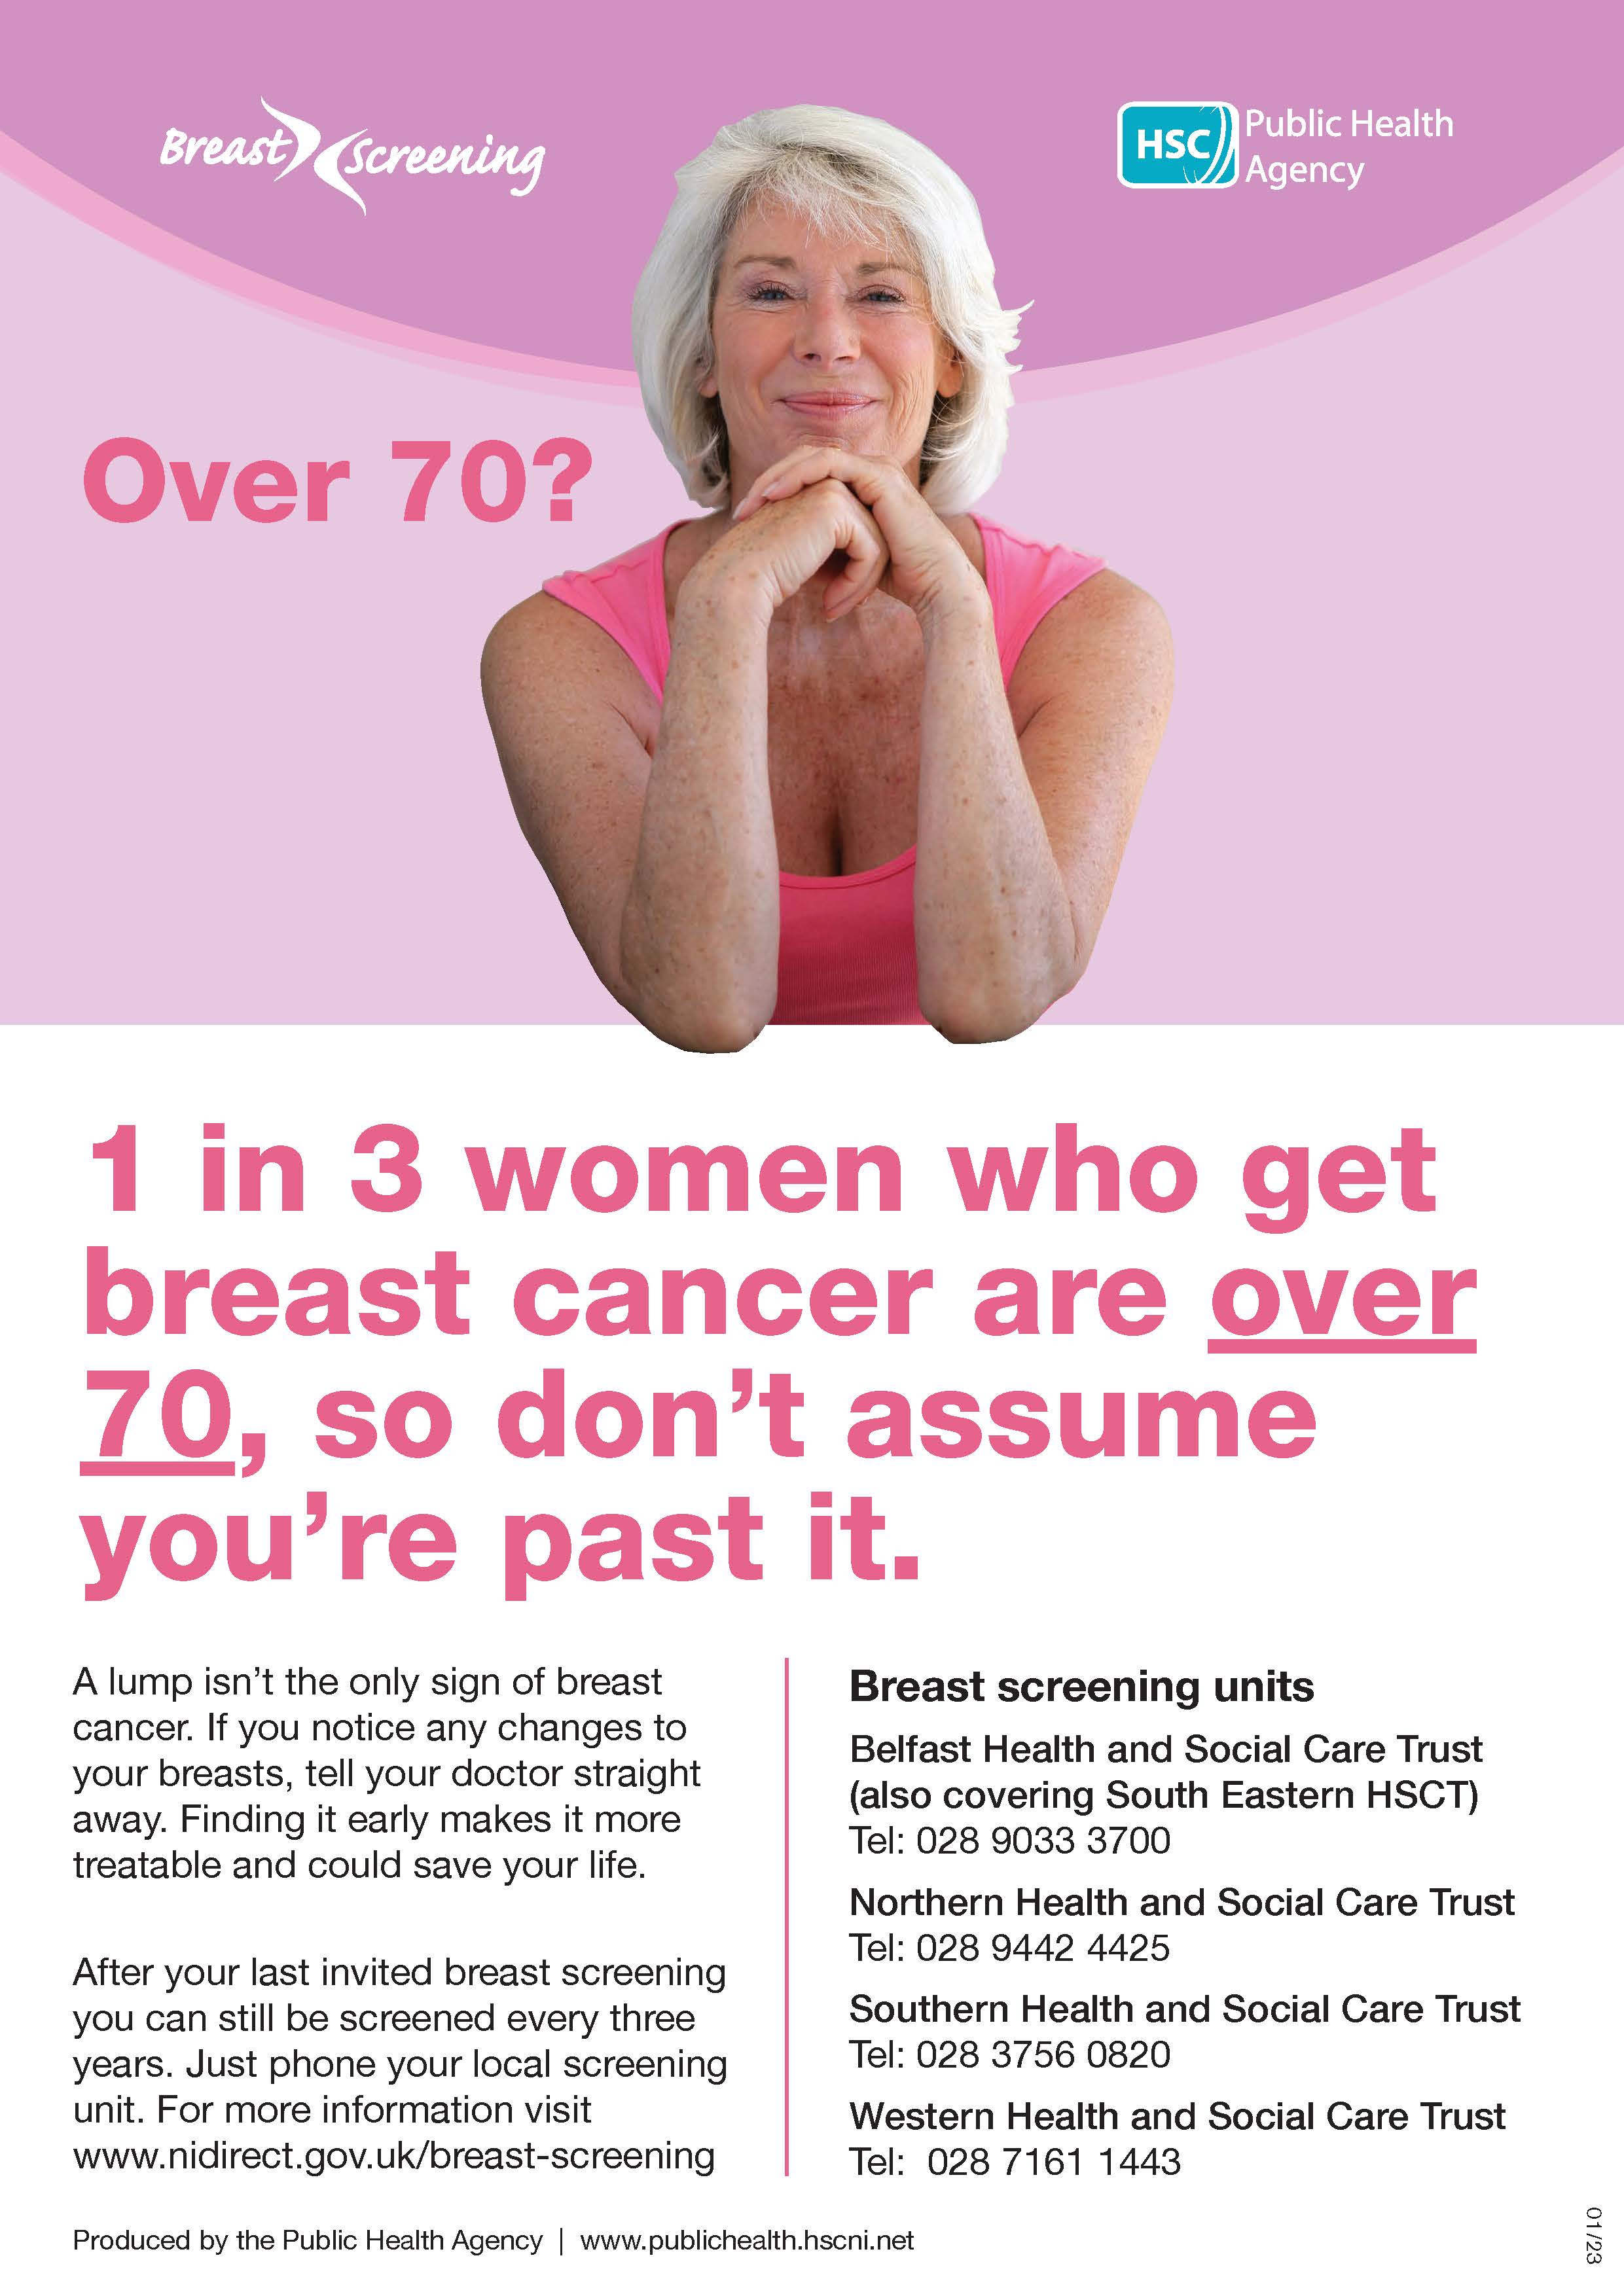 Image of over 70s breast screening poster